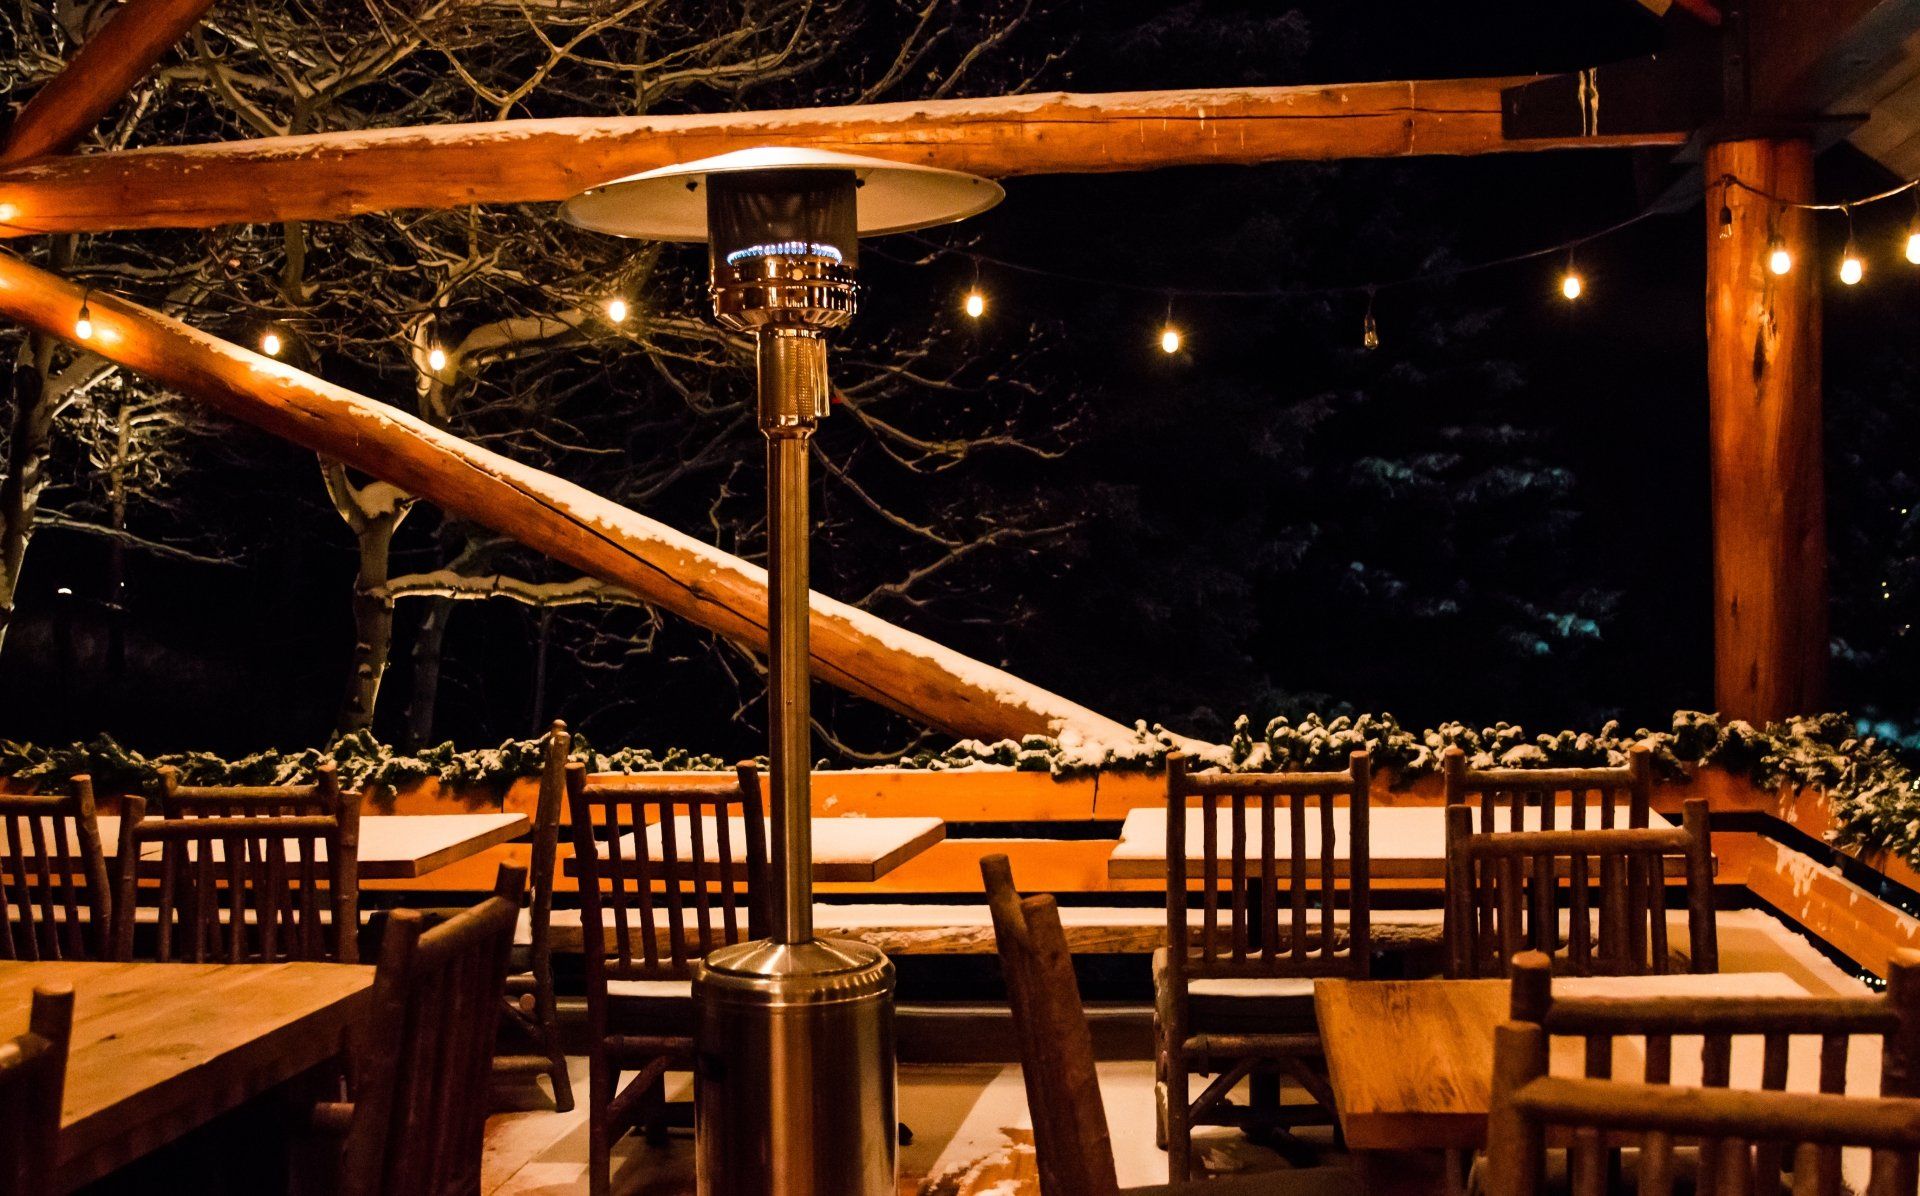 A snow-covered outdoor dining area with propane heaters